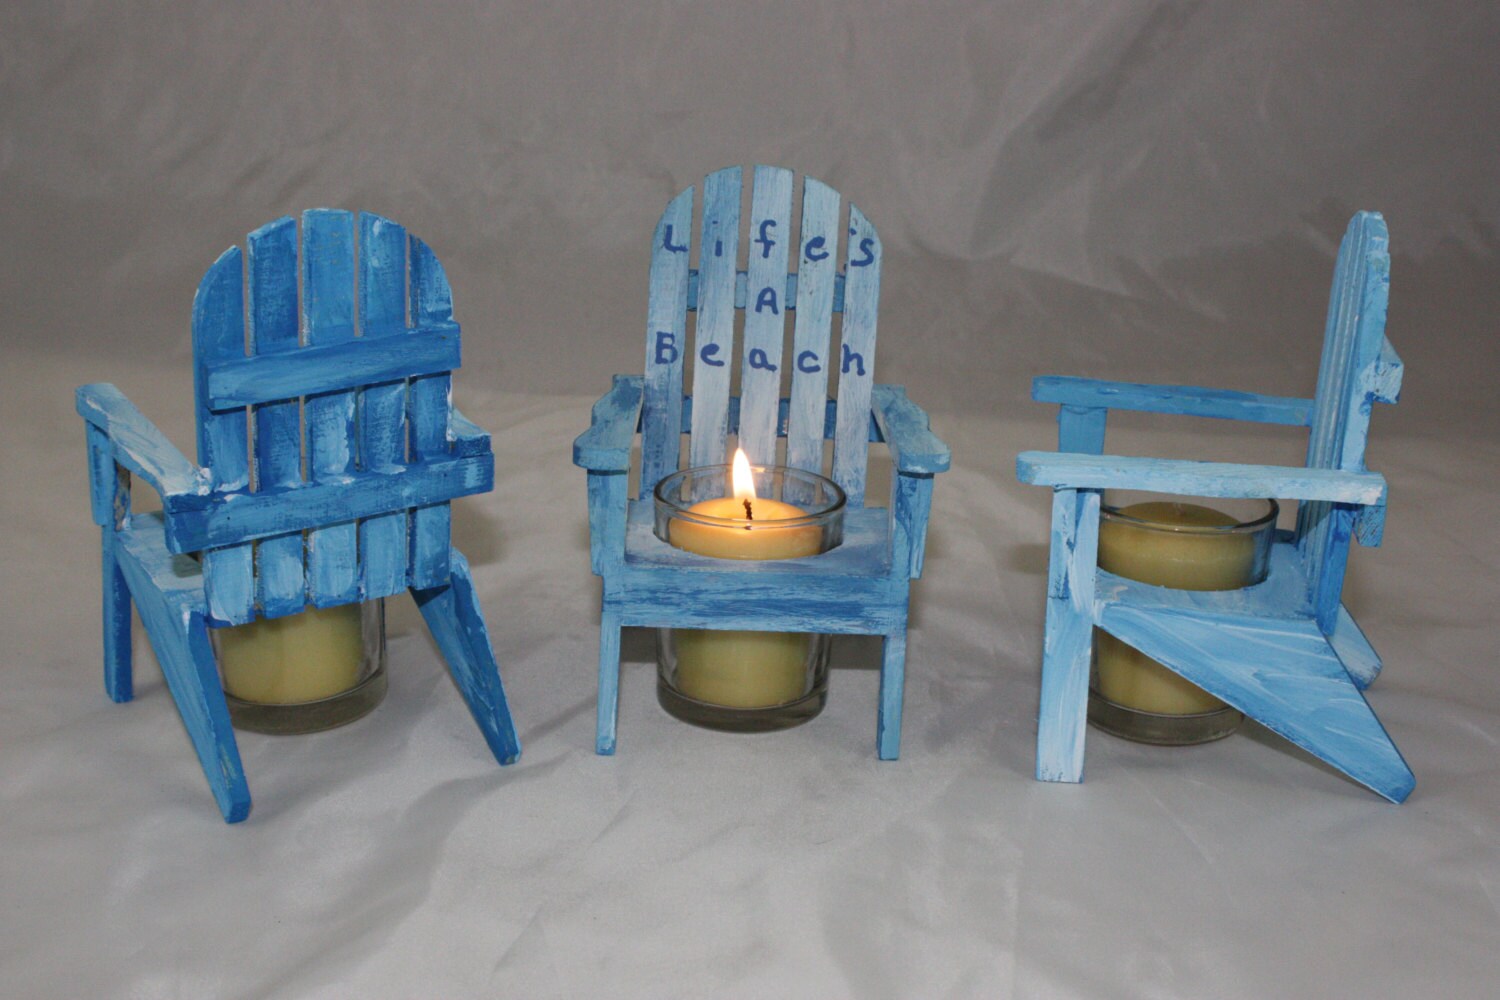 Modern Beach Chair Candle Holder with Simple Decor